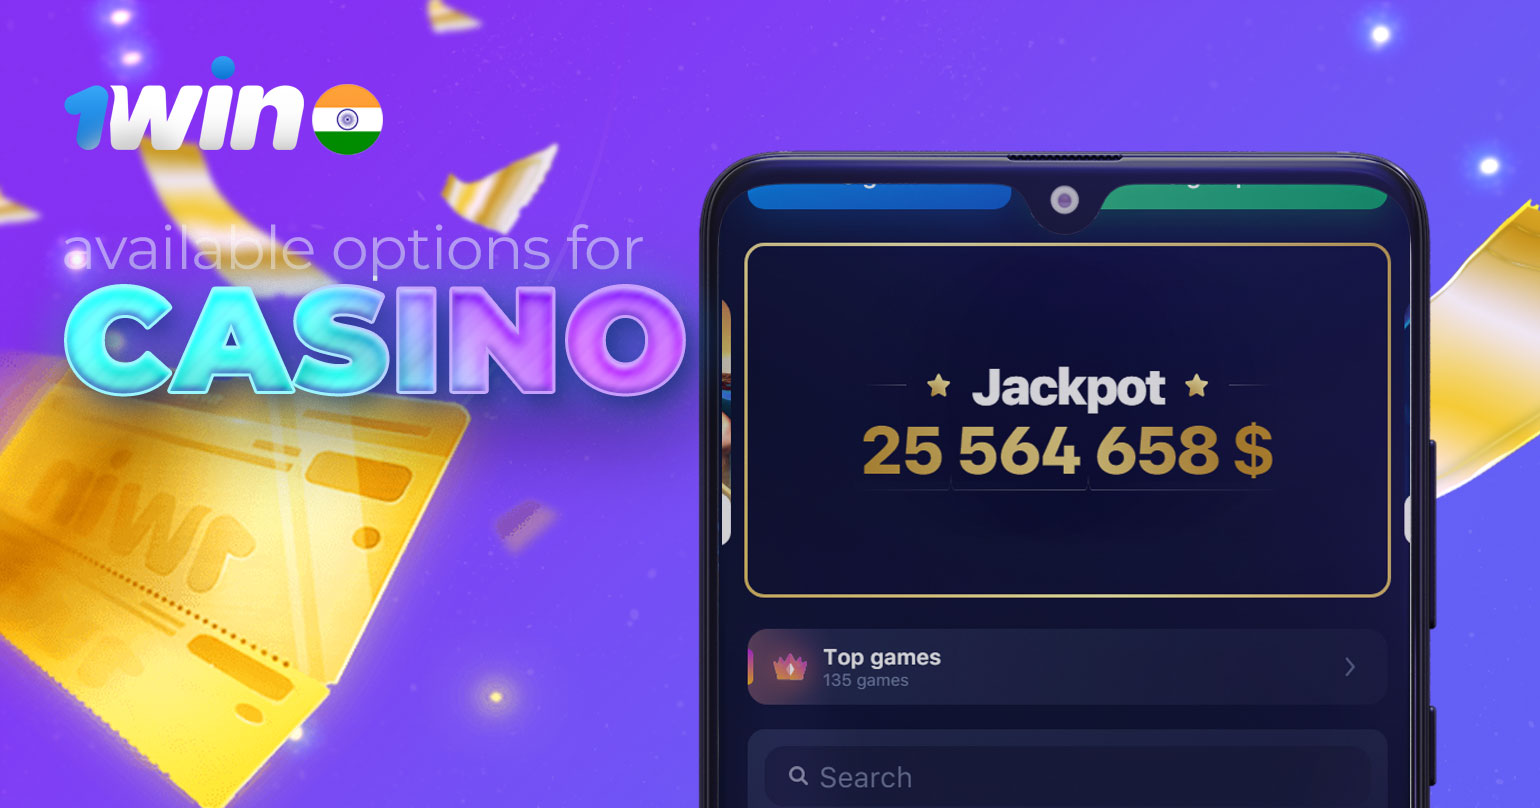 All available casino games and also casino promotions on the 1win india app.